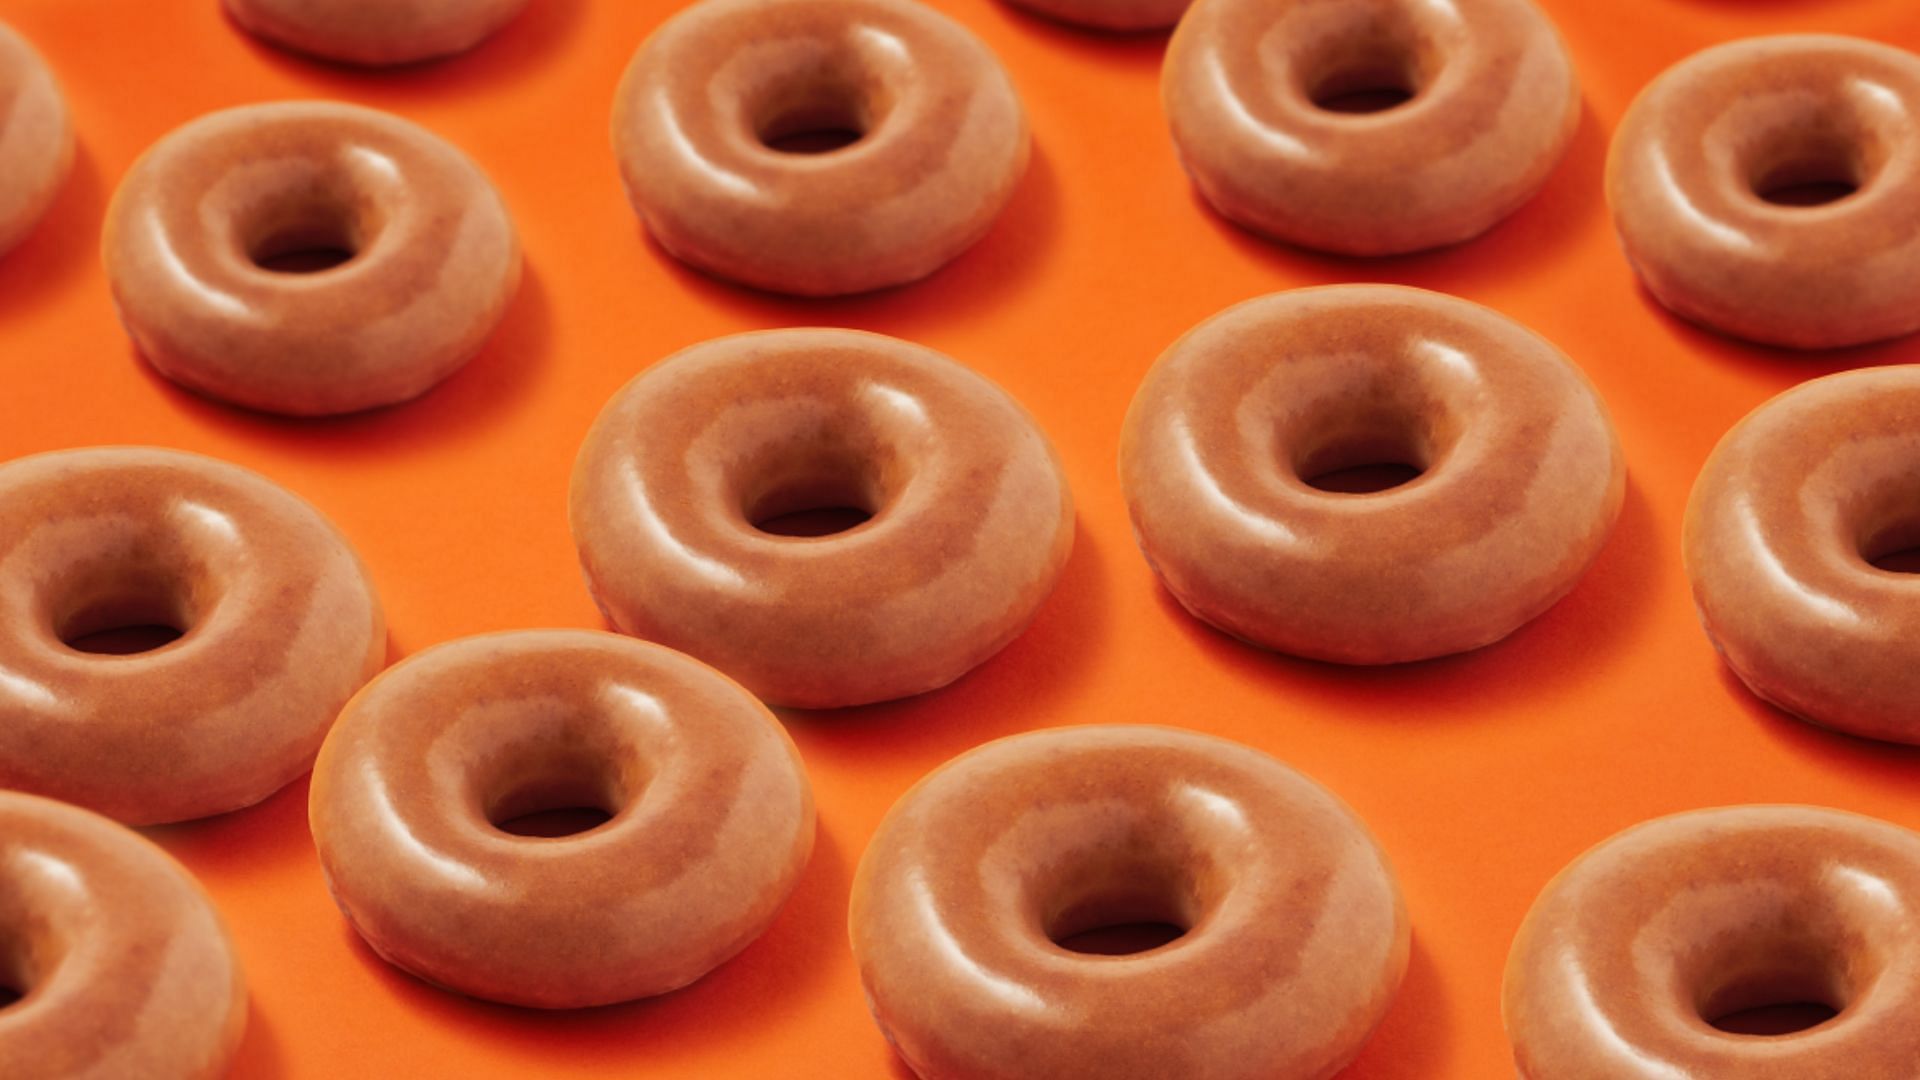 the Pumpkin Spice Original Glazed Donuts will be available at all participating locations on April 1, 2023 and April 2, 2023 (Image via Krispy Kreme)